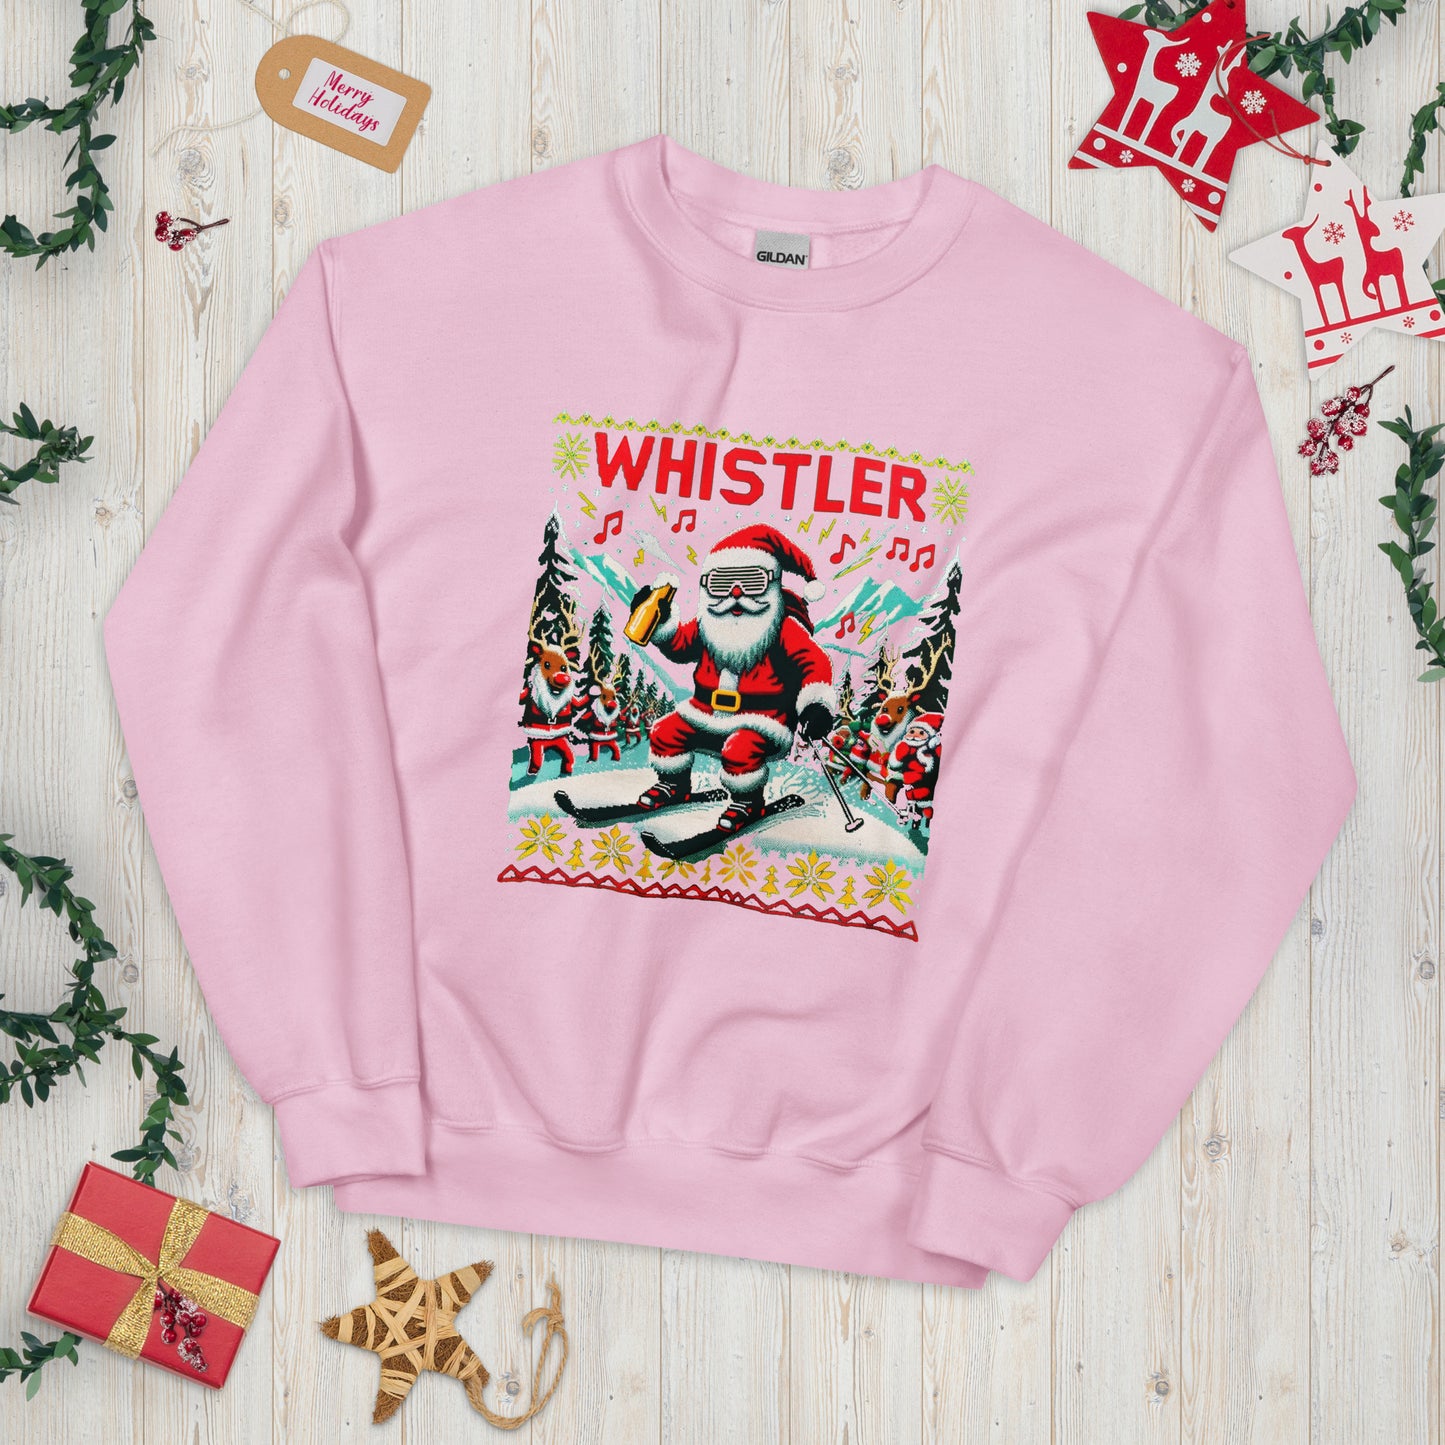 Santa Skiing drinking beer with reindeer christmas print in Whistler, printed sweater by Whistler Shirts